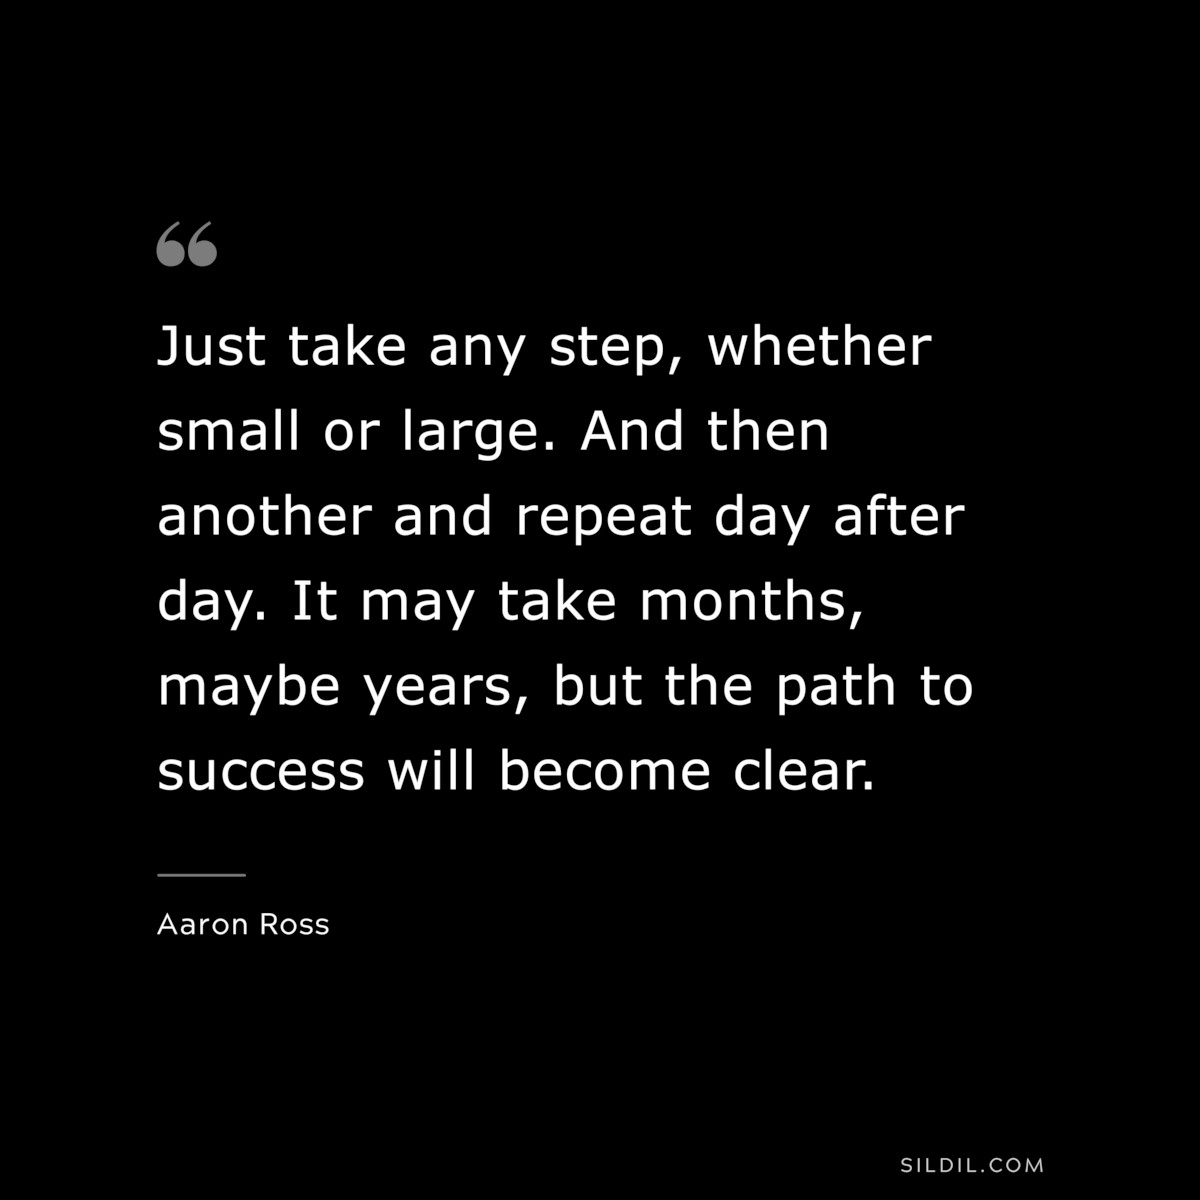 Just take any step, whether small or large. And then another and repeat day after day. It may take months, maybe years, but the path to success will become clear. ― Aaron Ross